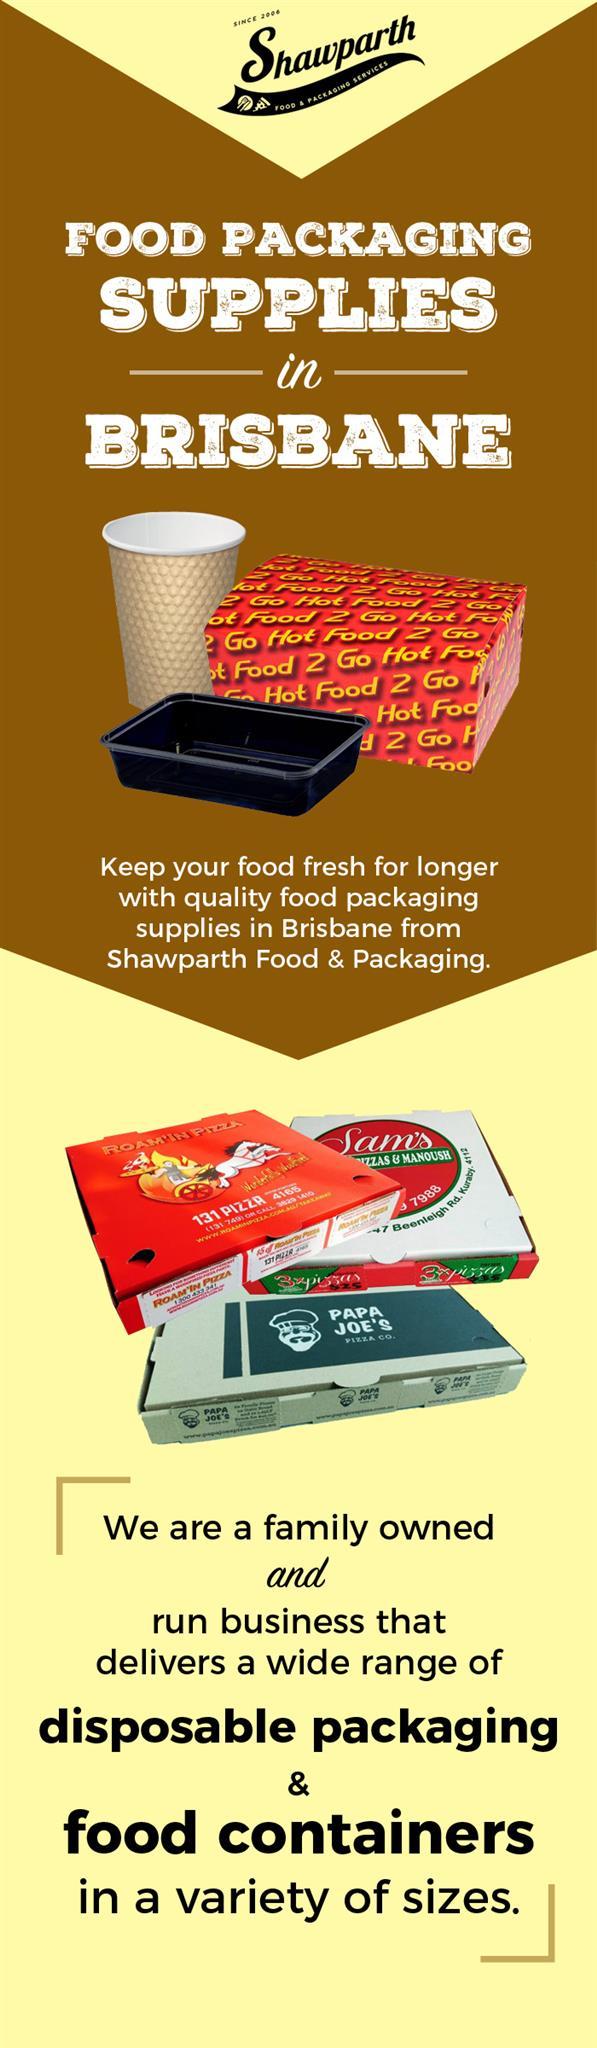 Shawparth Food and Packaging – A Leading Food Packaging Supplier in Brisbane